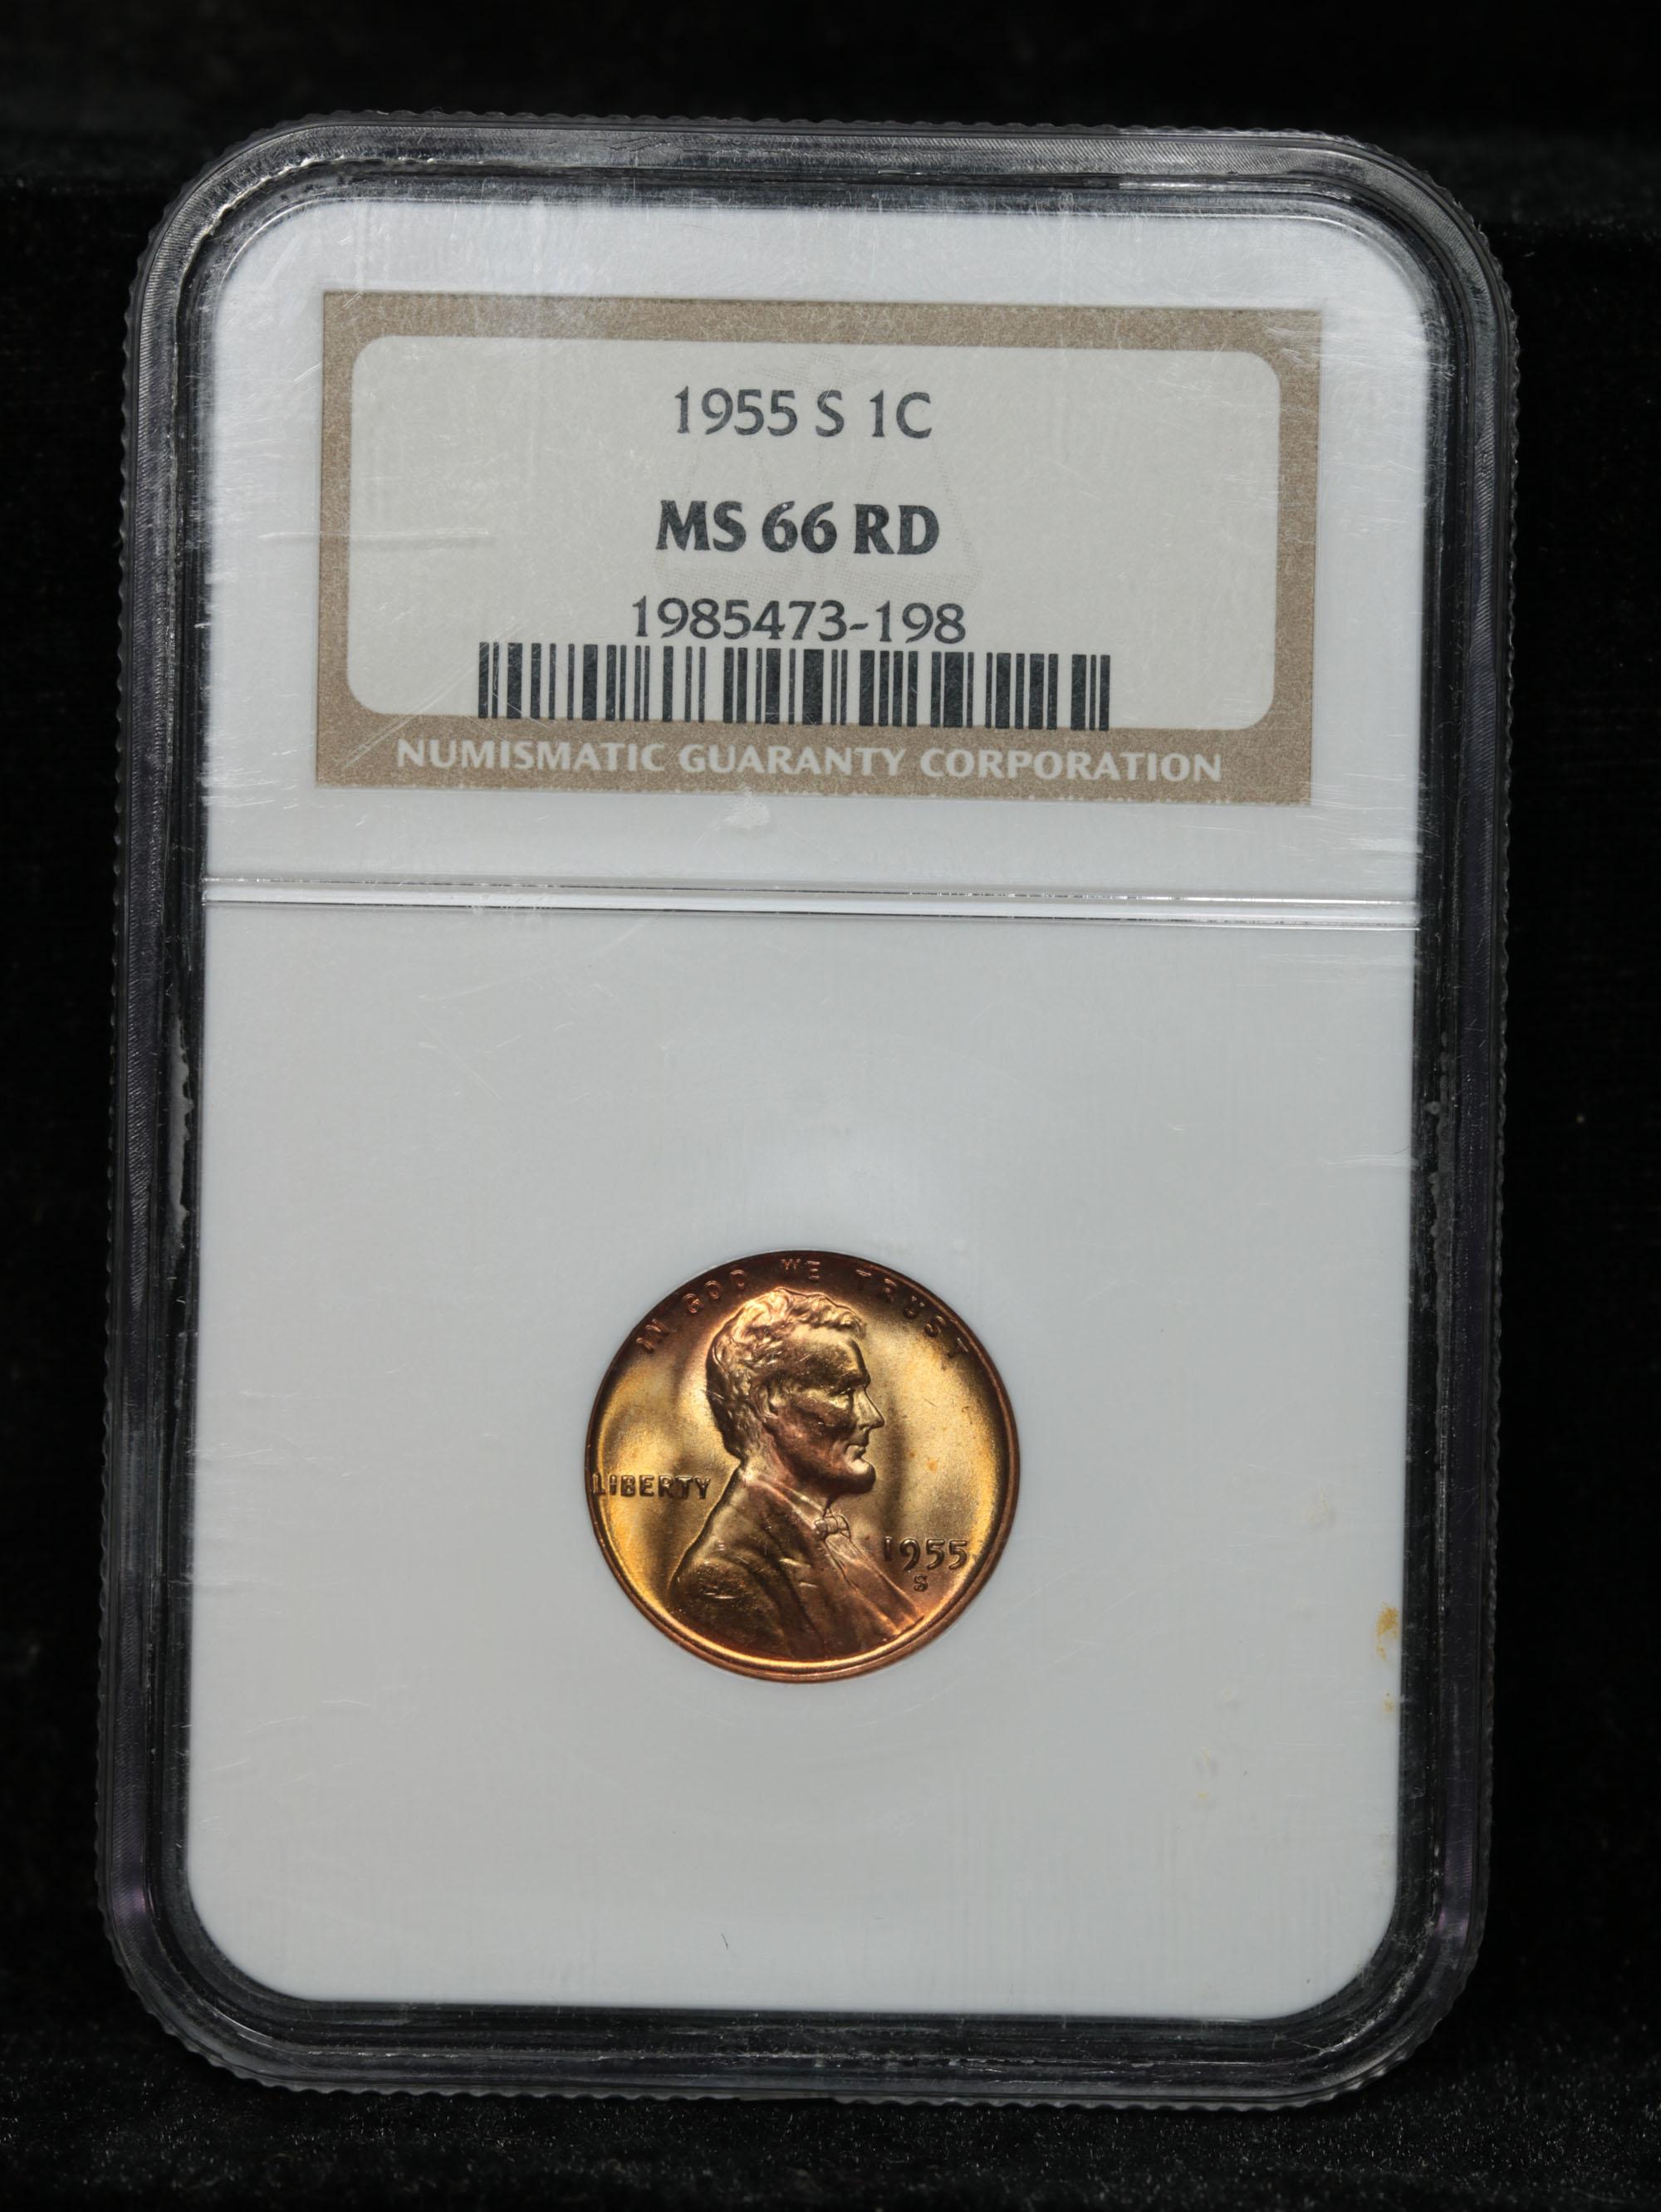 NGC 1955-s Lincoln Cent 1c Graded ms66 rd By NGC